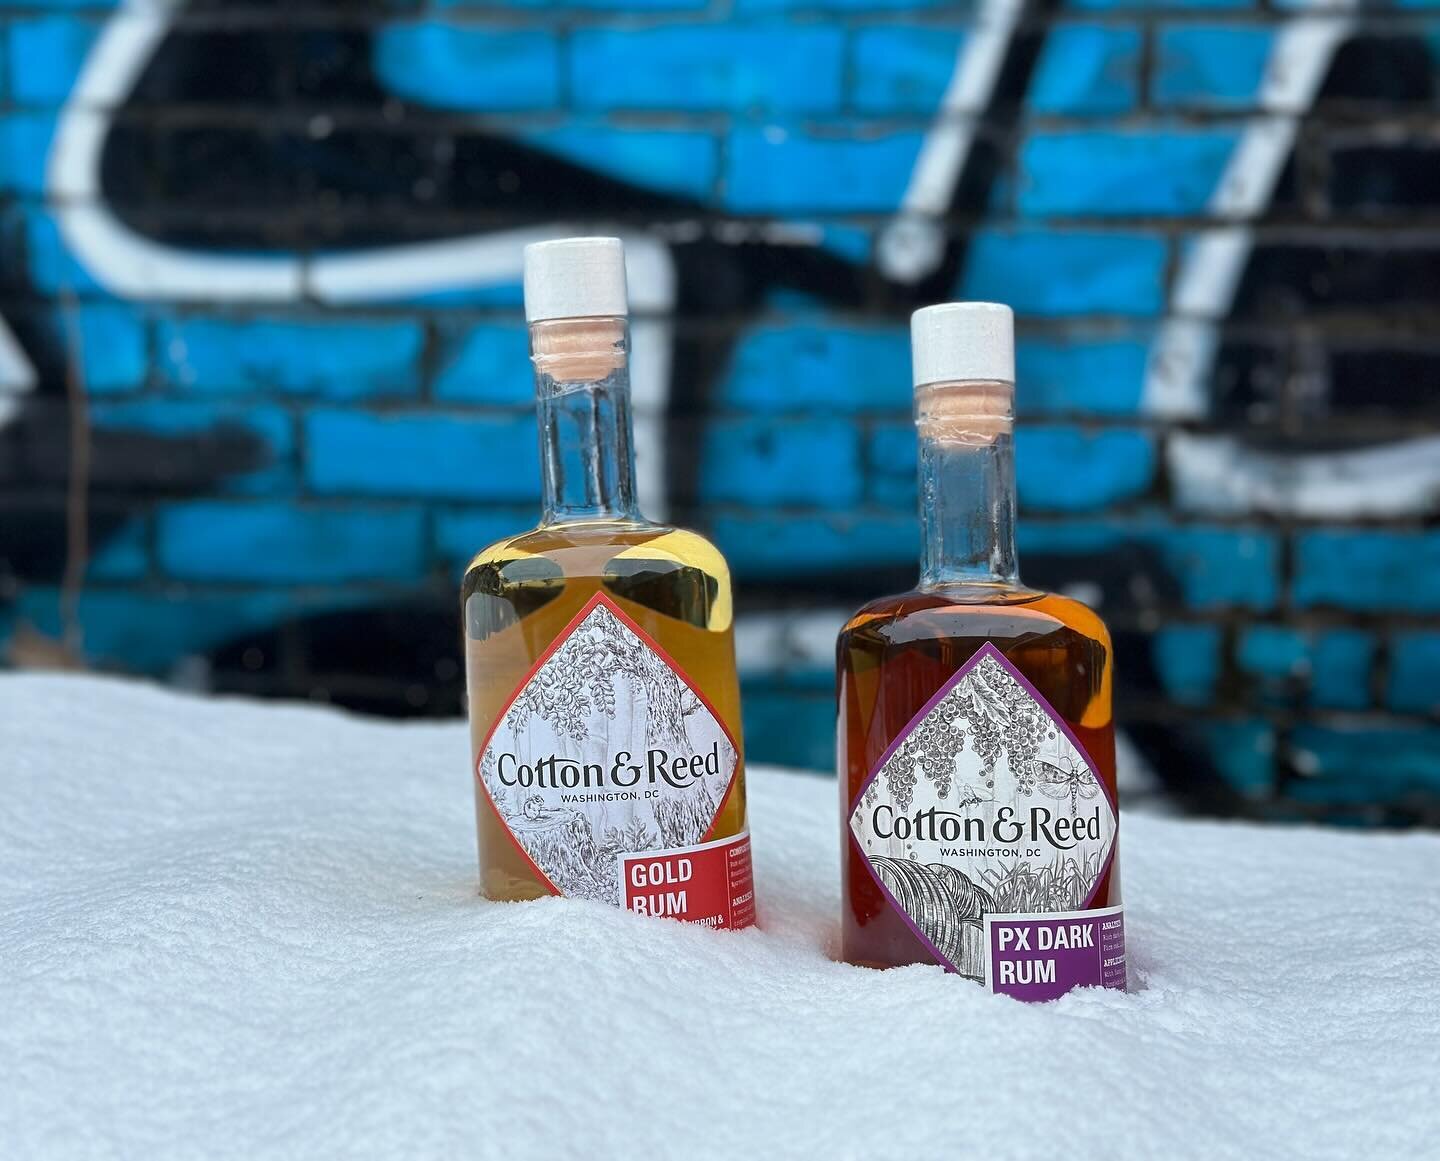 Don&rsquo;t let a little snow keep you from reaching for that rum. On the flavor front, the spice biscuit character of our Gold Rum and the rich oaky fruit of our PX Dark Rum are perfectly suited to warm you up. 

On the warm weather association, don